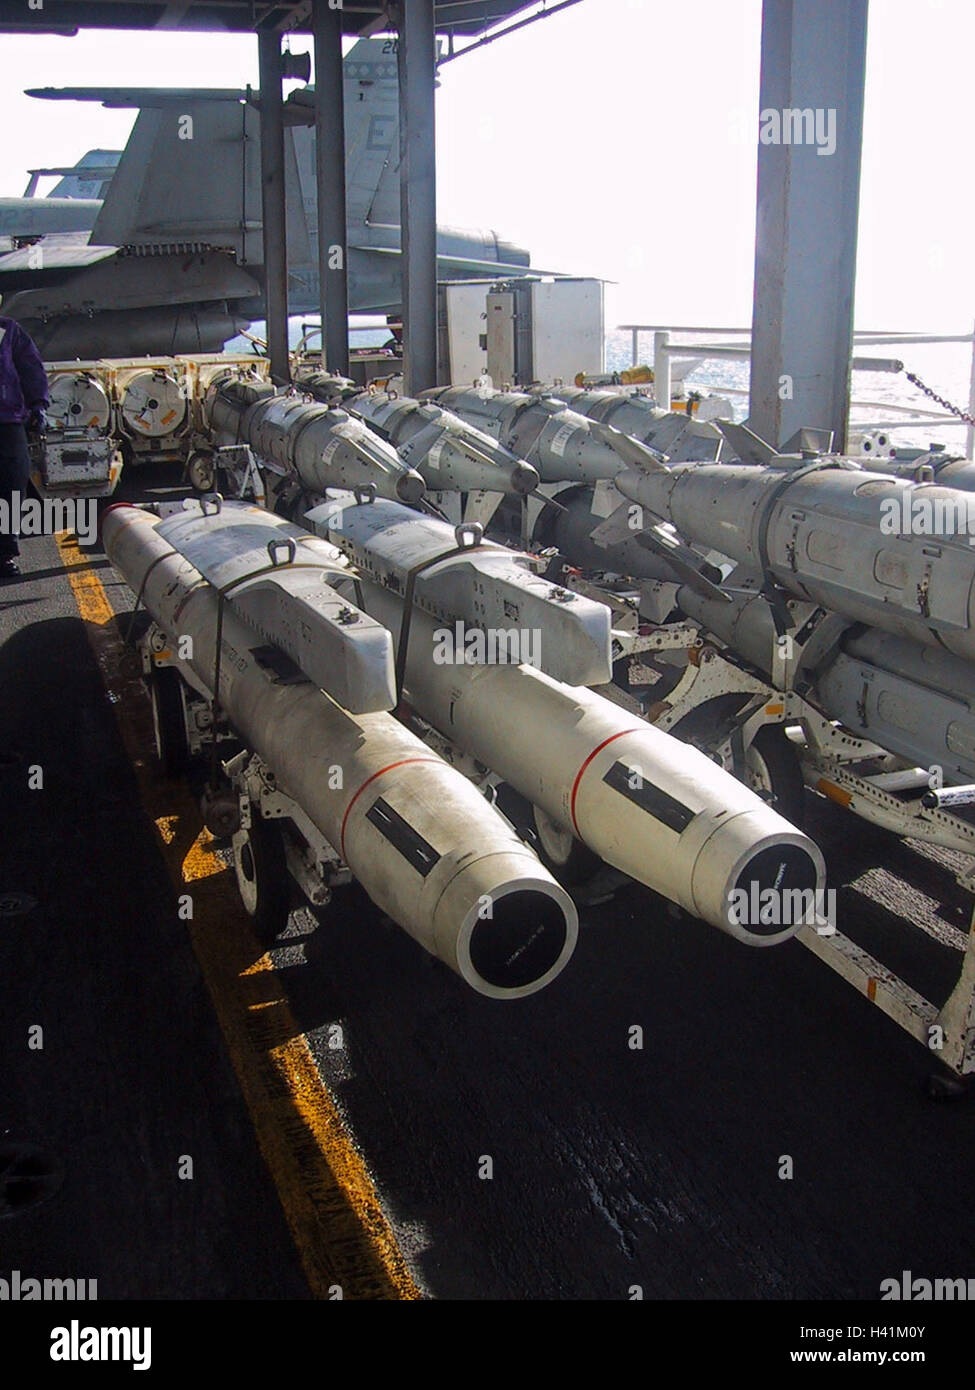 3rd February 2003 During Operation Enduring Freedom, bombs on trolleys on the USS Constellation (CV-64) in the Persian Gulf. Stock Photo